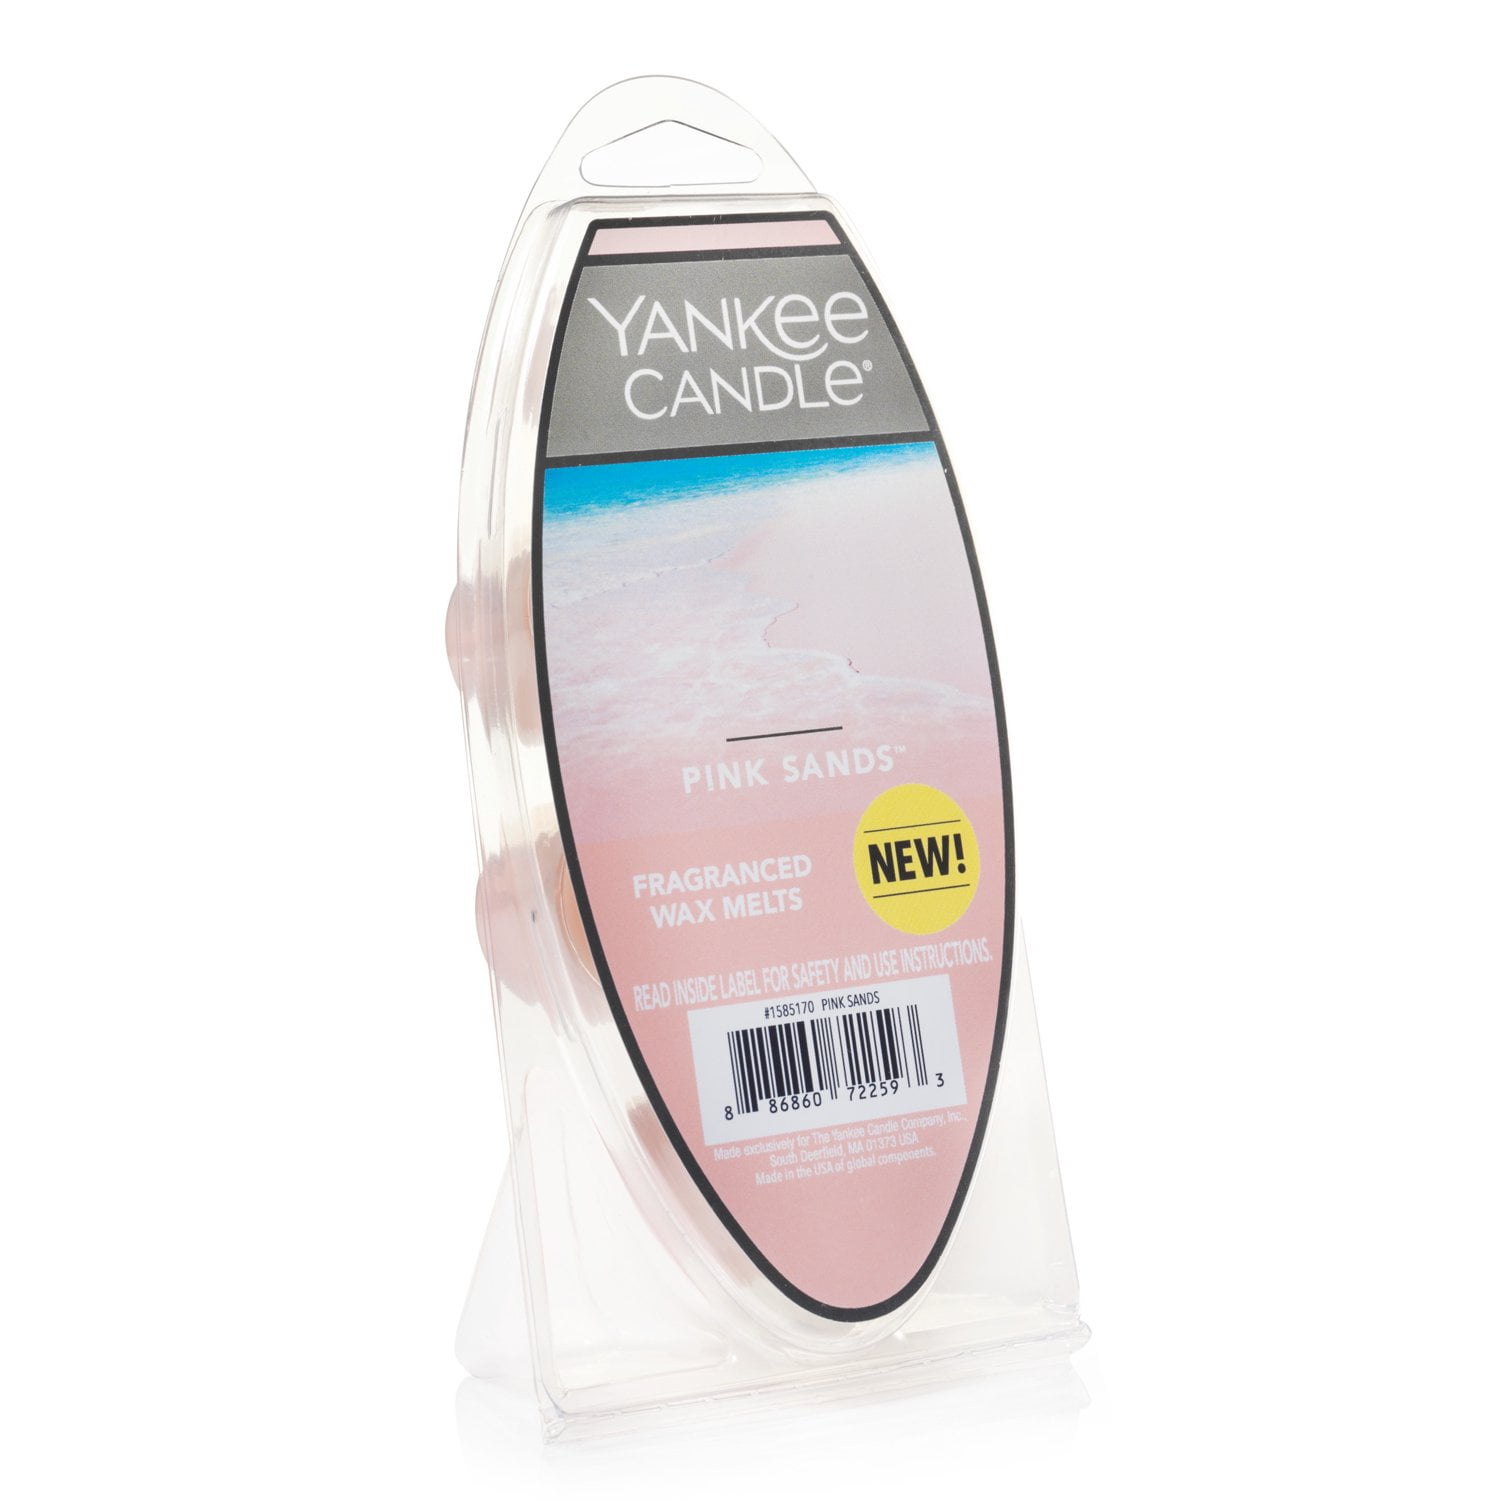 Yankee Candle Sandstone Wax Melt Warmer Kit with 5 Wax Melts - Pink Sands,  MidSummer's Night, Sage & Citrus, Wild Orchid, and Balsam & Cedar